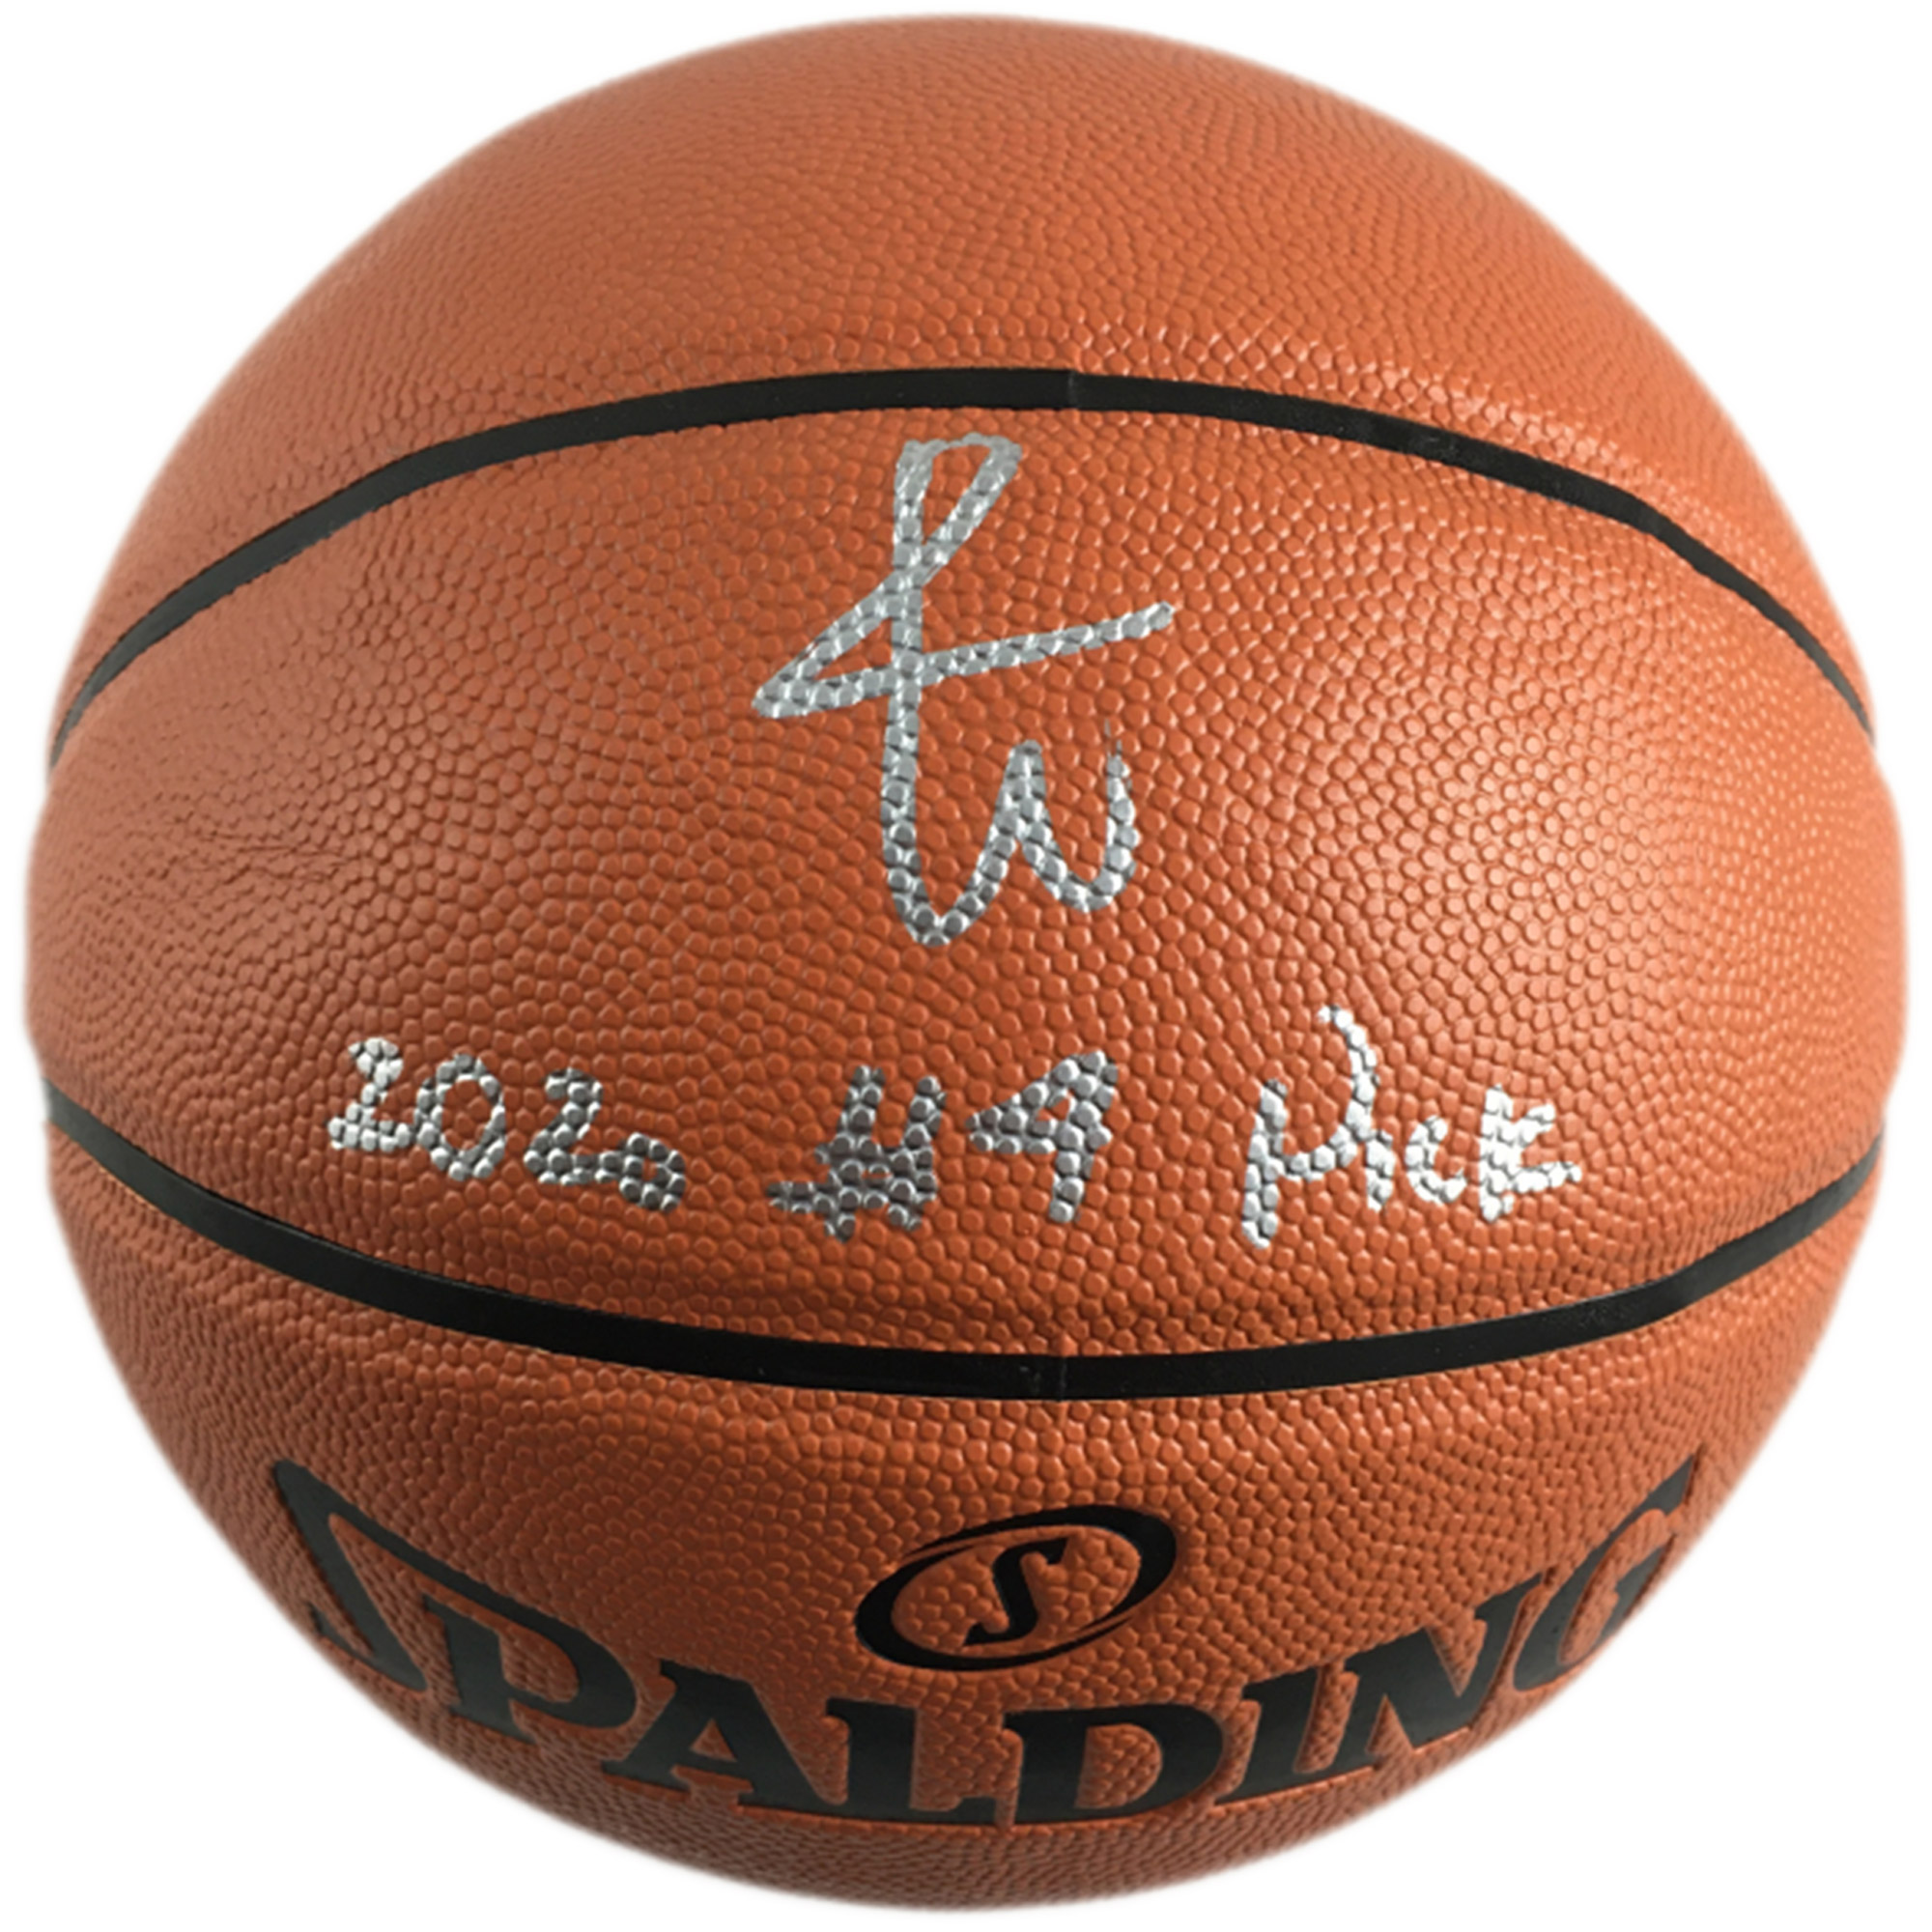 Basketball – Patrick Williams Rookie Year Limited Edition Hand S...